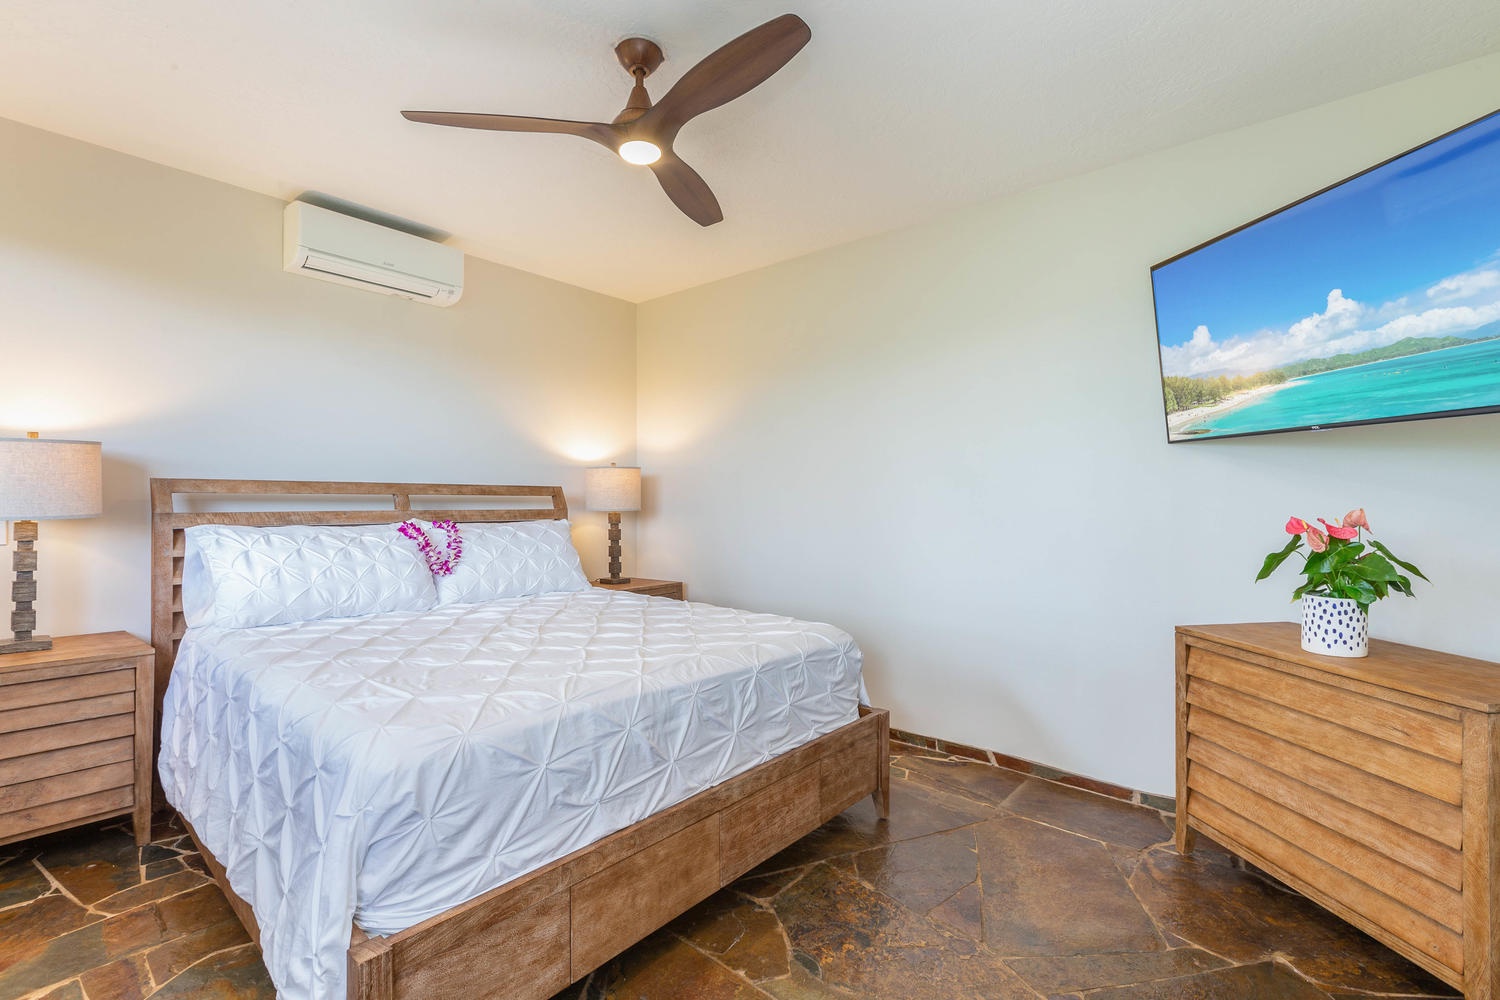 Princeville Vacation Rentals, Pohaku Villa - Downstairs guest bedroom with large flat-screen television